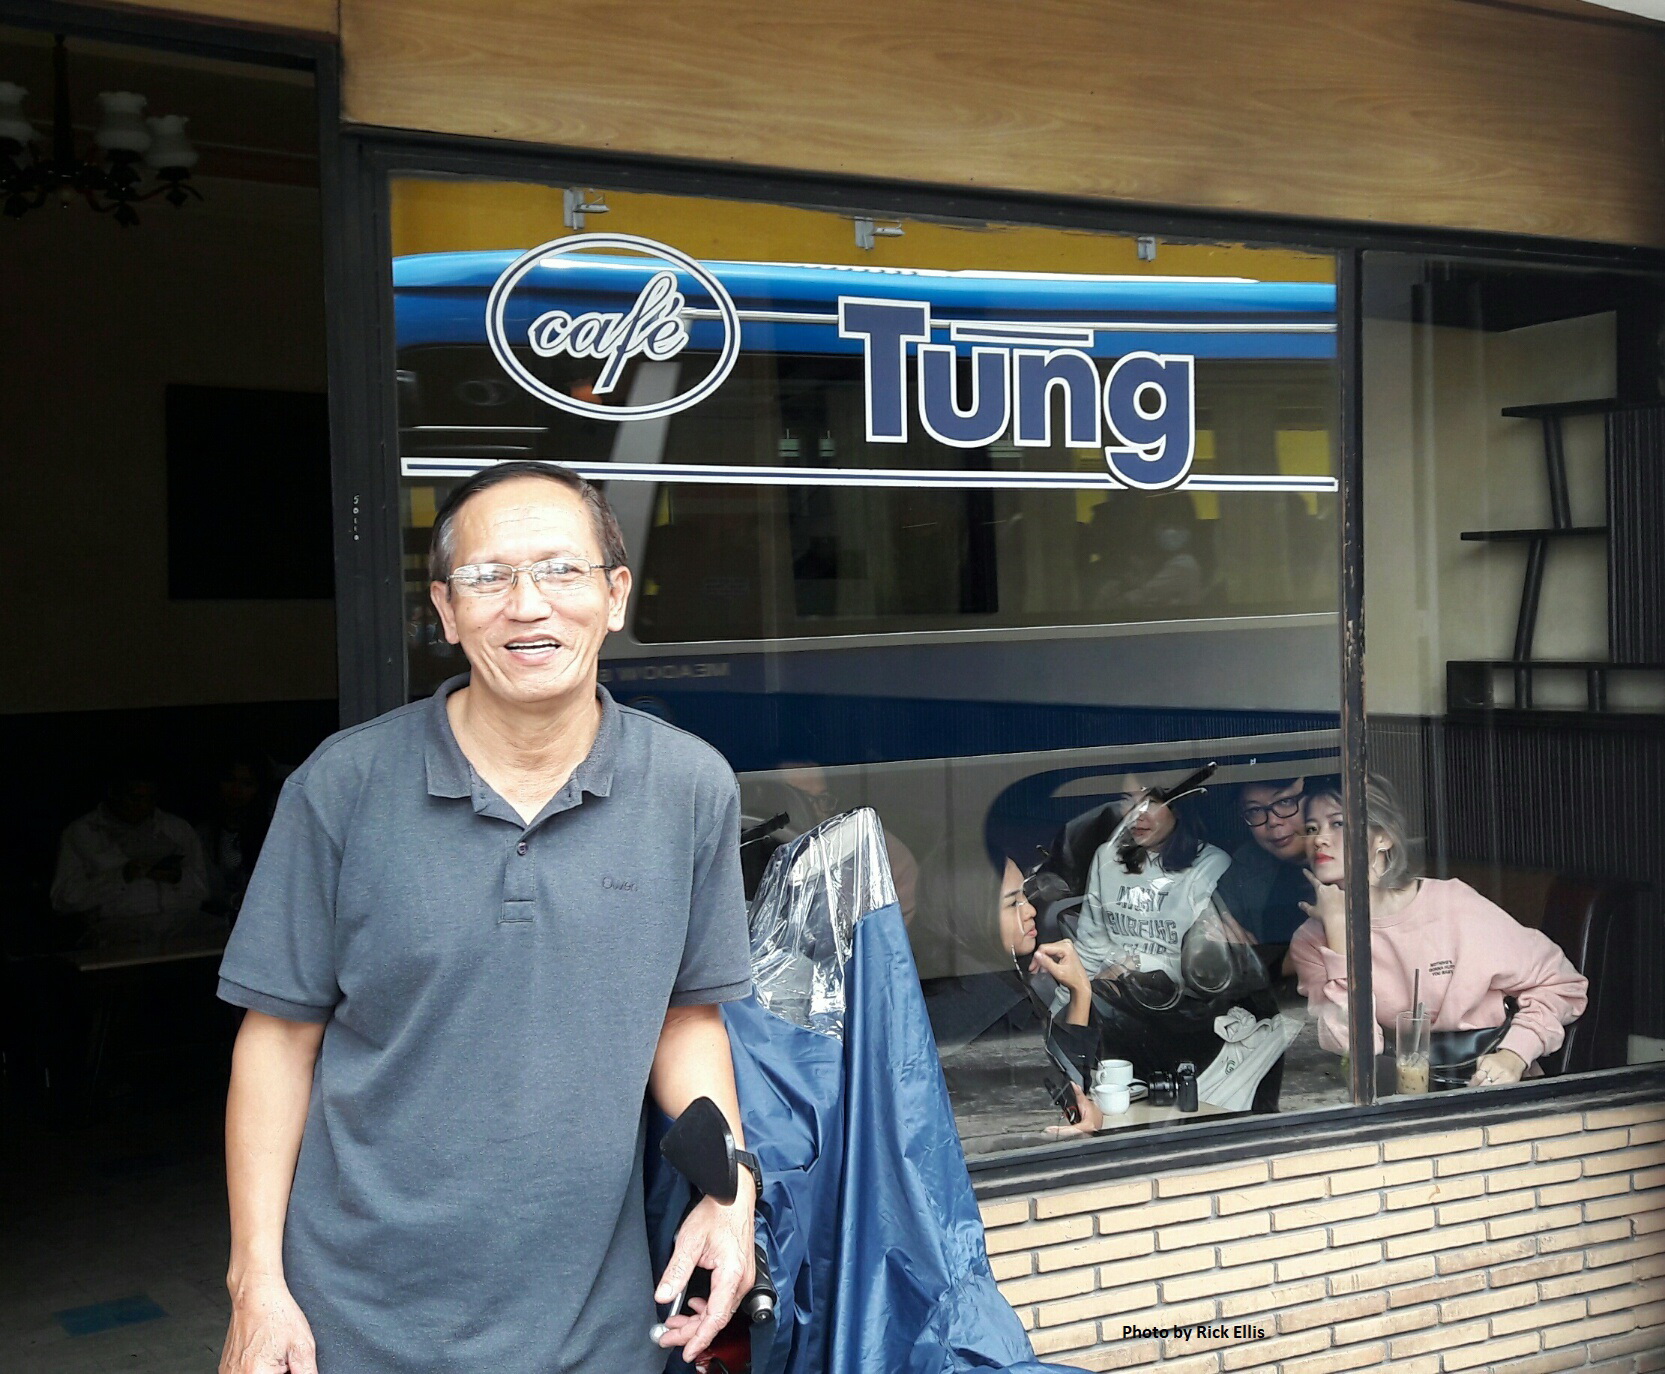 The owner of Cafe Tung